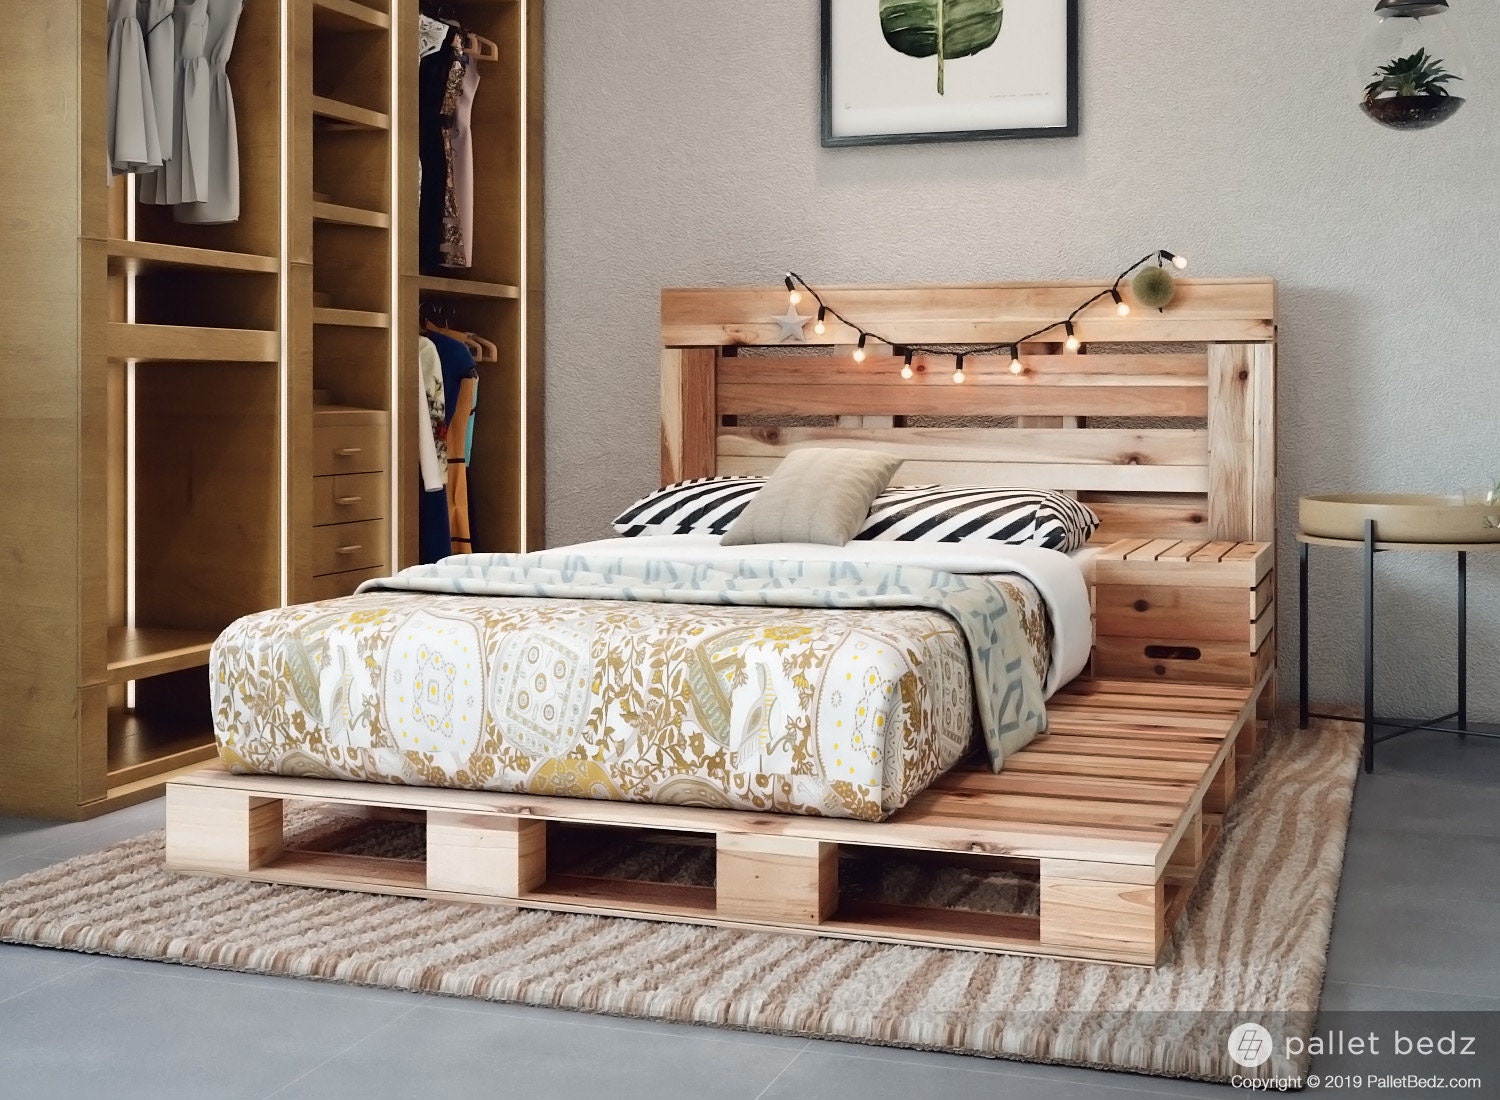 Pallet Bed The Twin Size Includes, Twin Bed Out Of Pallets